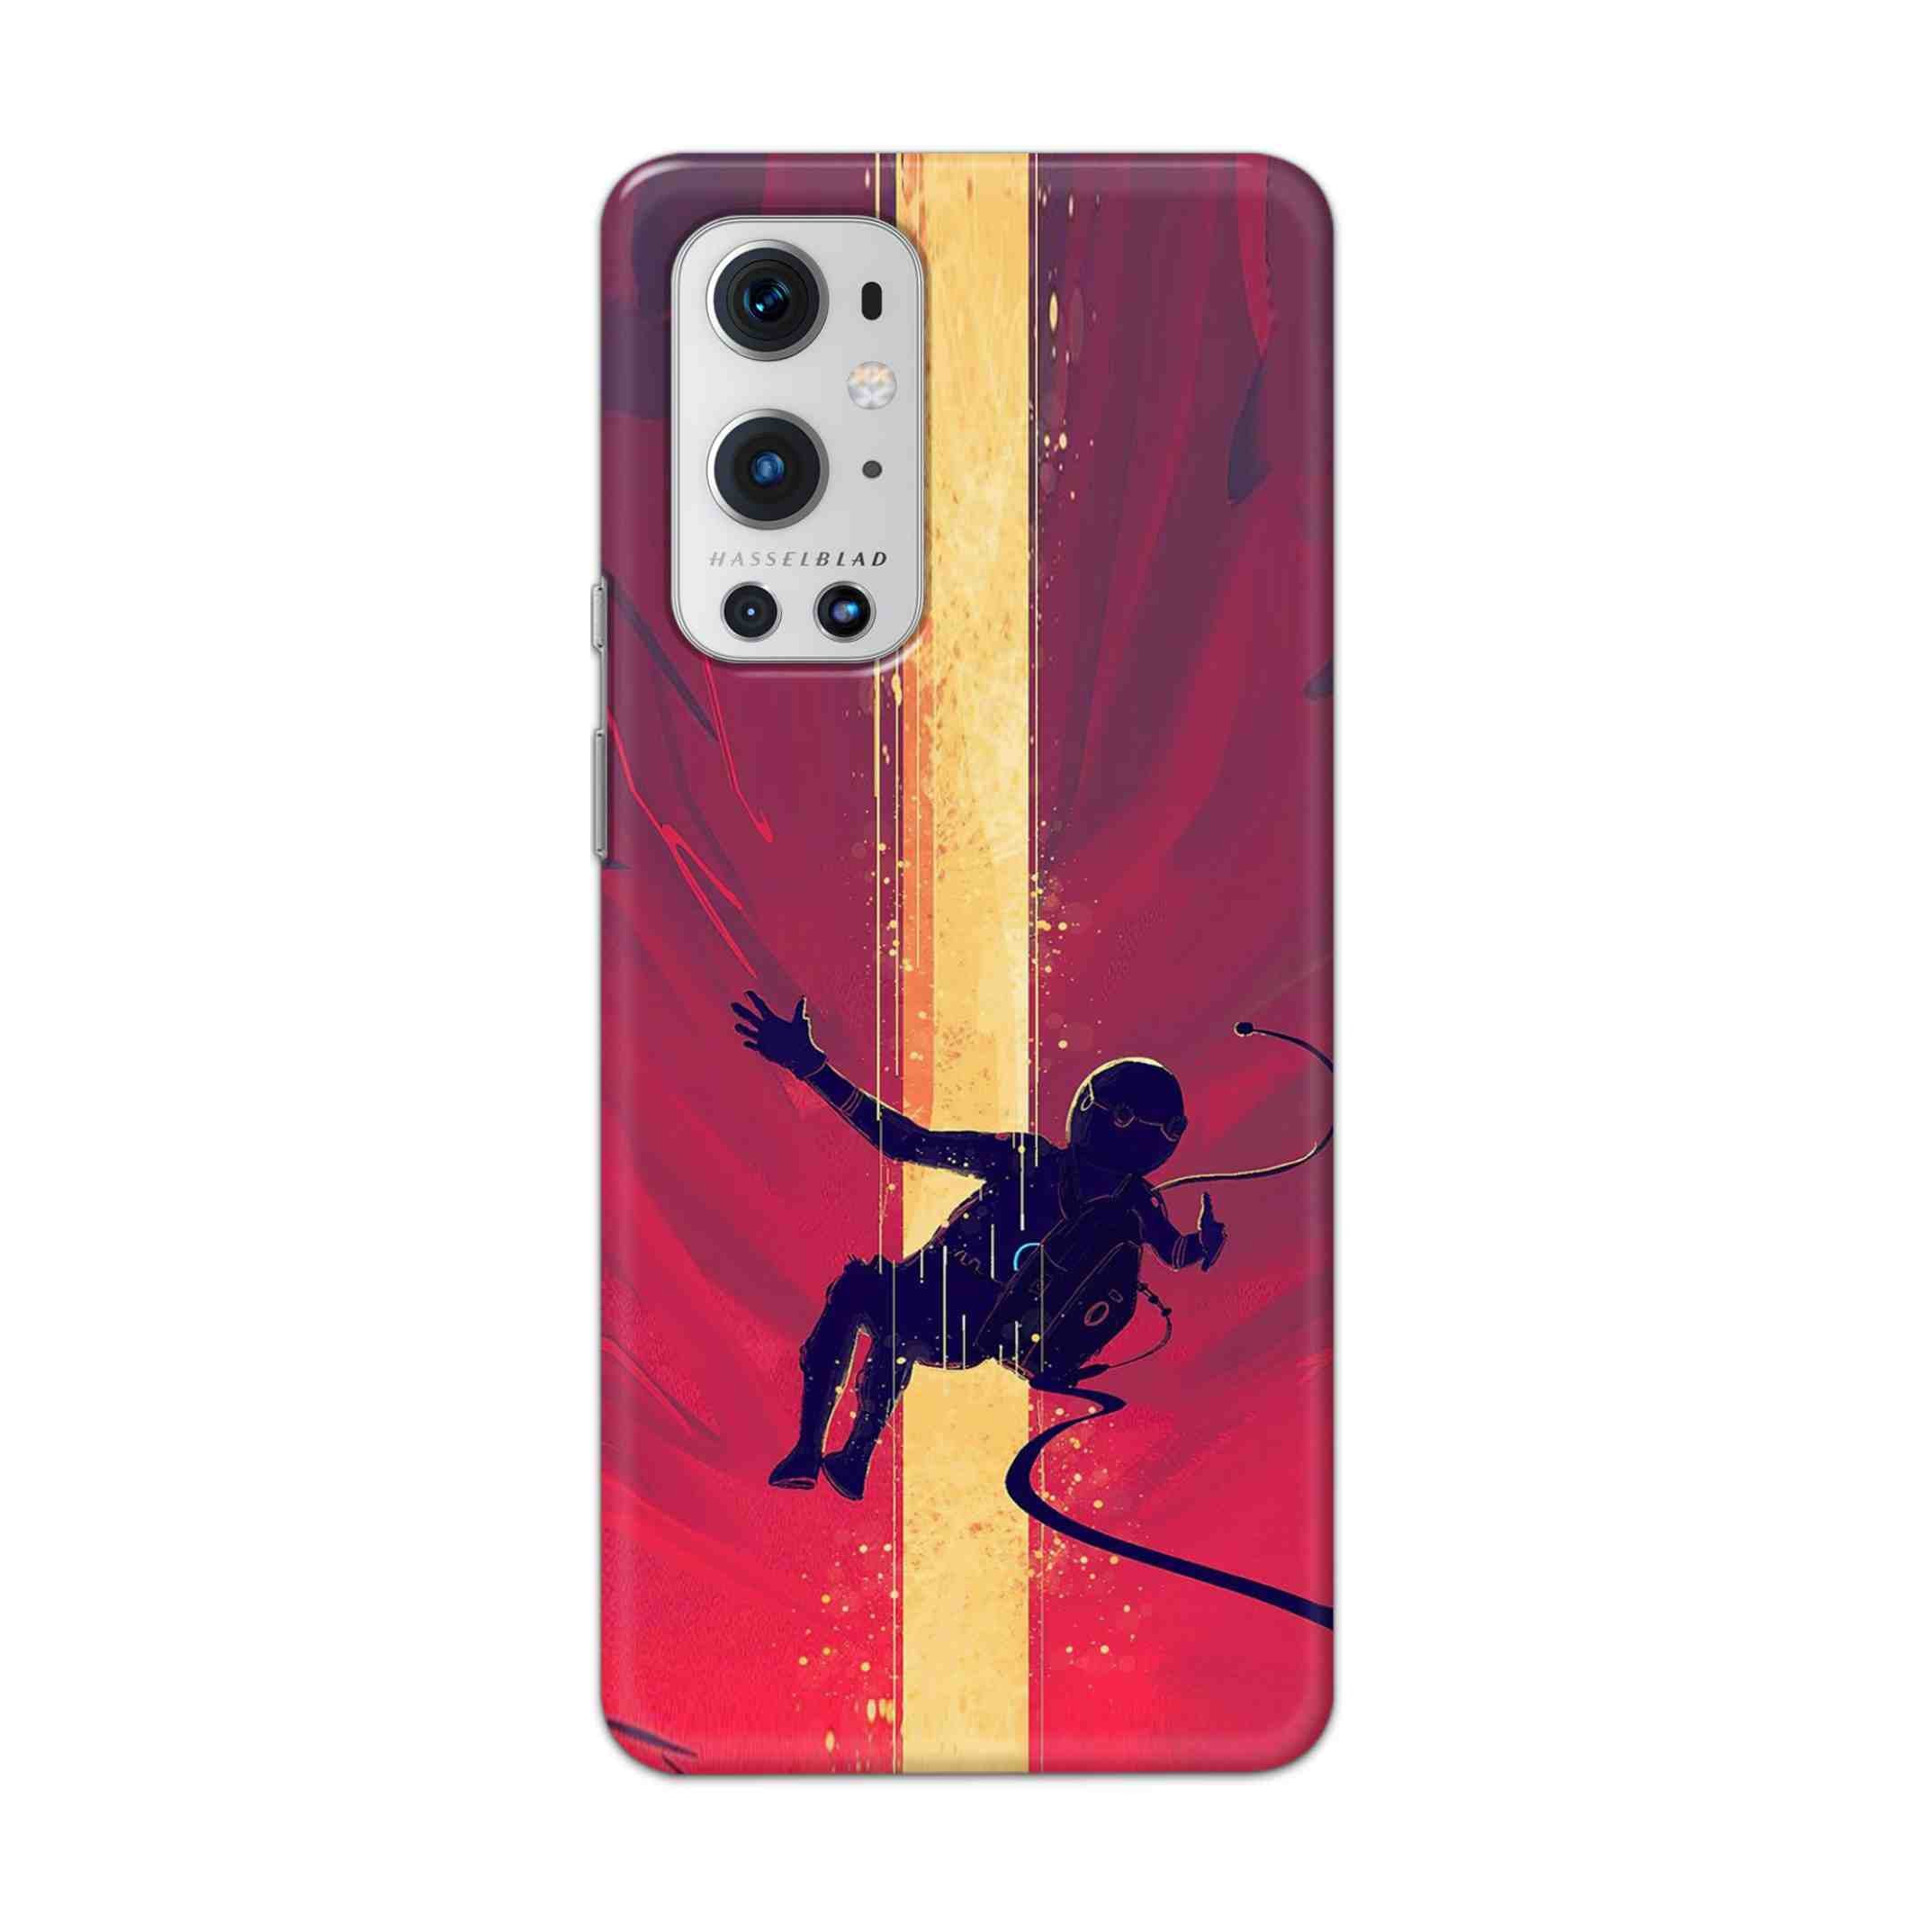 Buy Astronaut In Air Hard Back Mobile Phone Case Cover For OnePlus 9 Pro Online